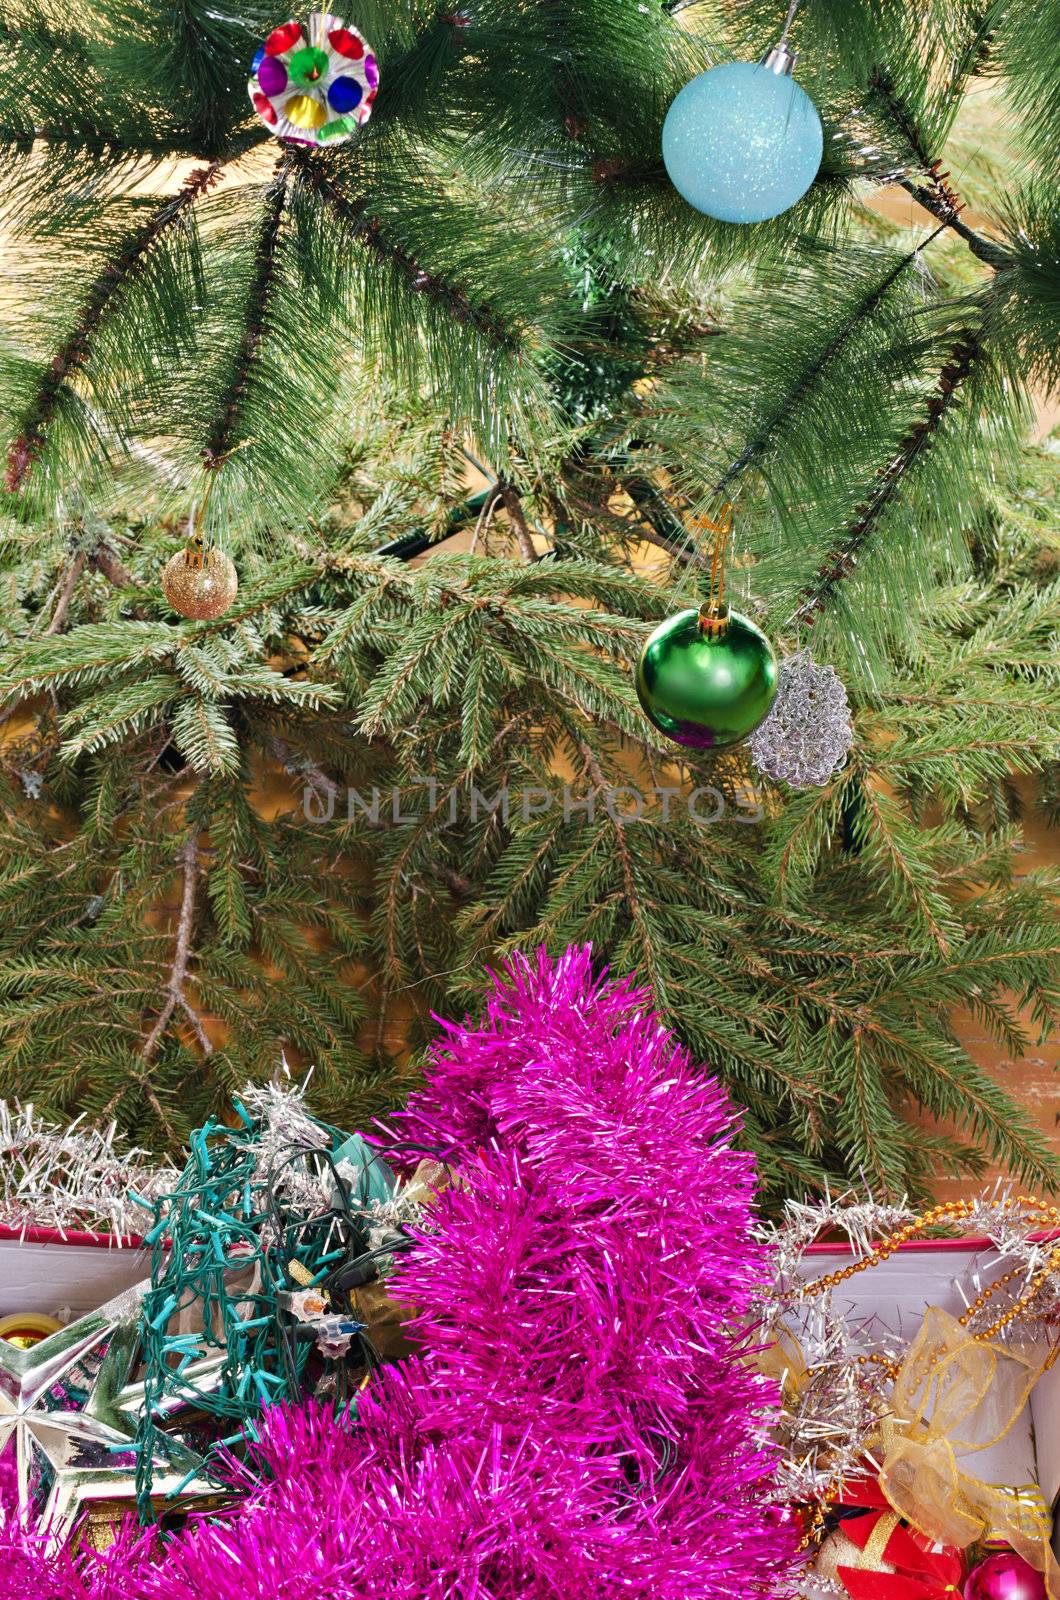 Detail of box with Christmas decorations in front of pine tree with baubles